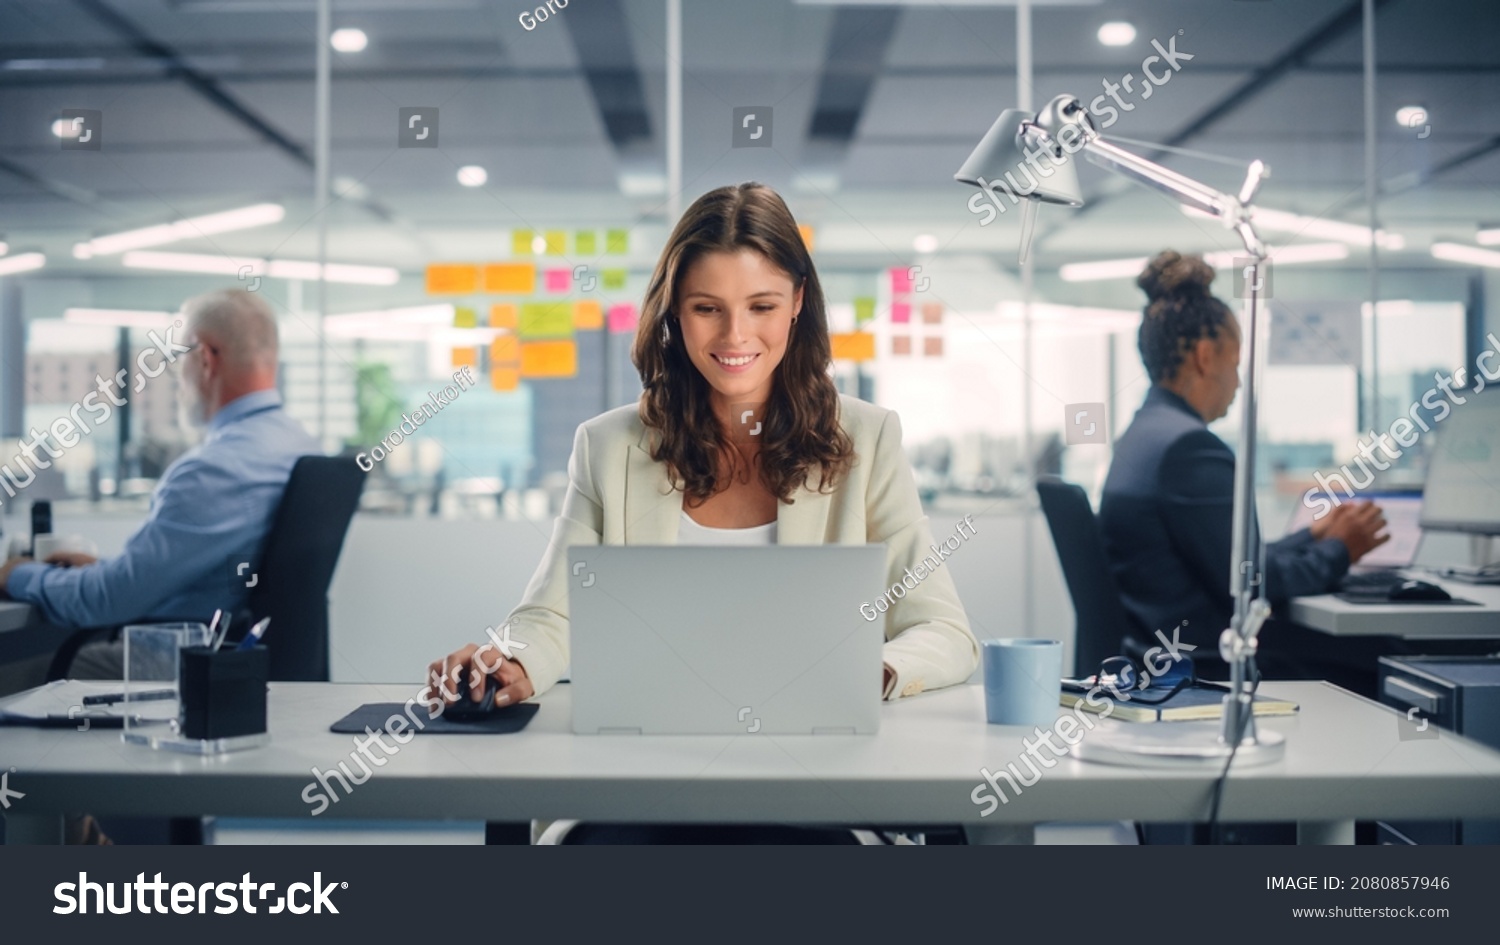 Young Happy Businesswoman Using Computer in Modern Office with Colleagues. Stylish Beautiful Manager Smiling, Working on Financial and Marketing Projects. Drinking Tea or Coffee from a Mug. #2080857946